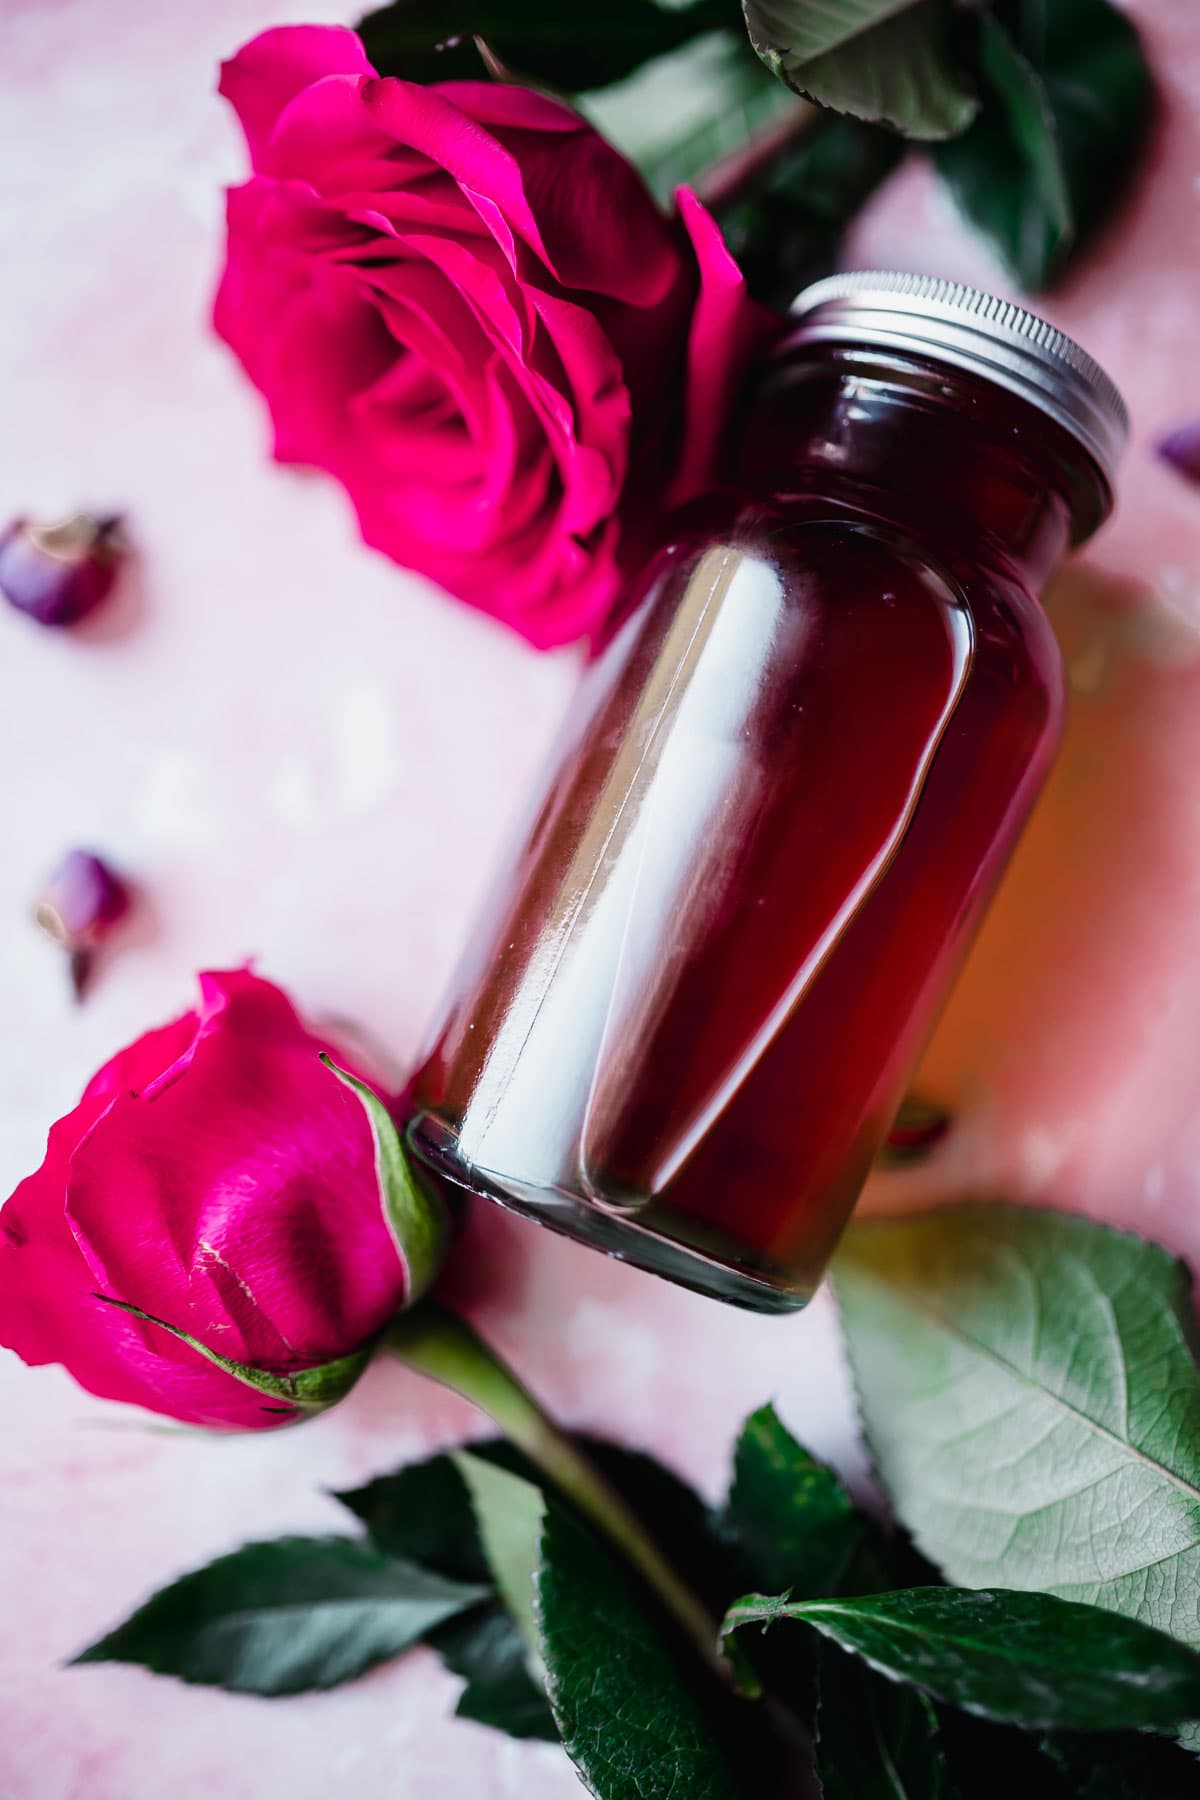 a bottle of rose water made at home is surrounding by two bright pink rose blossoms.